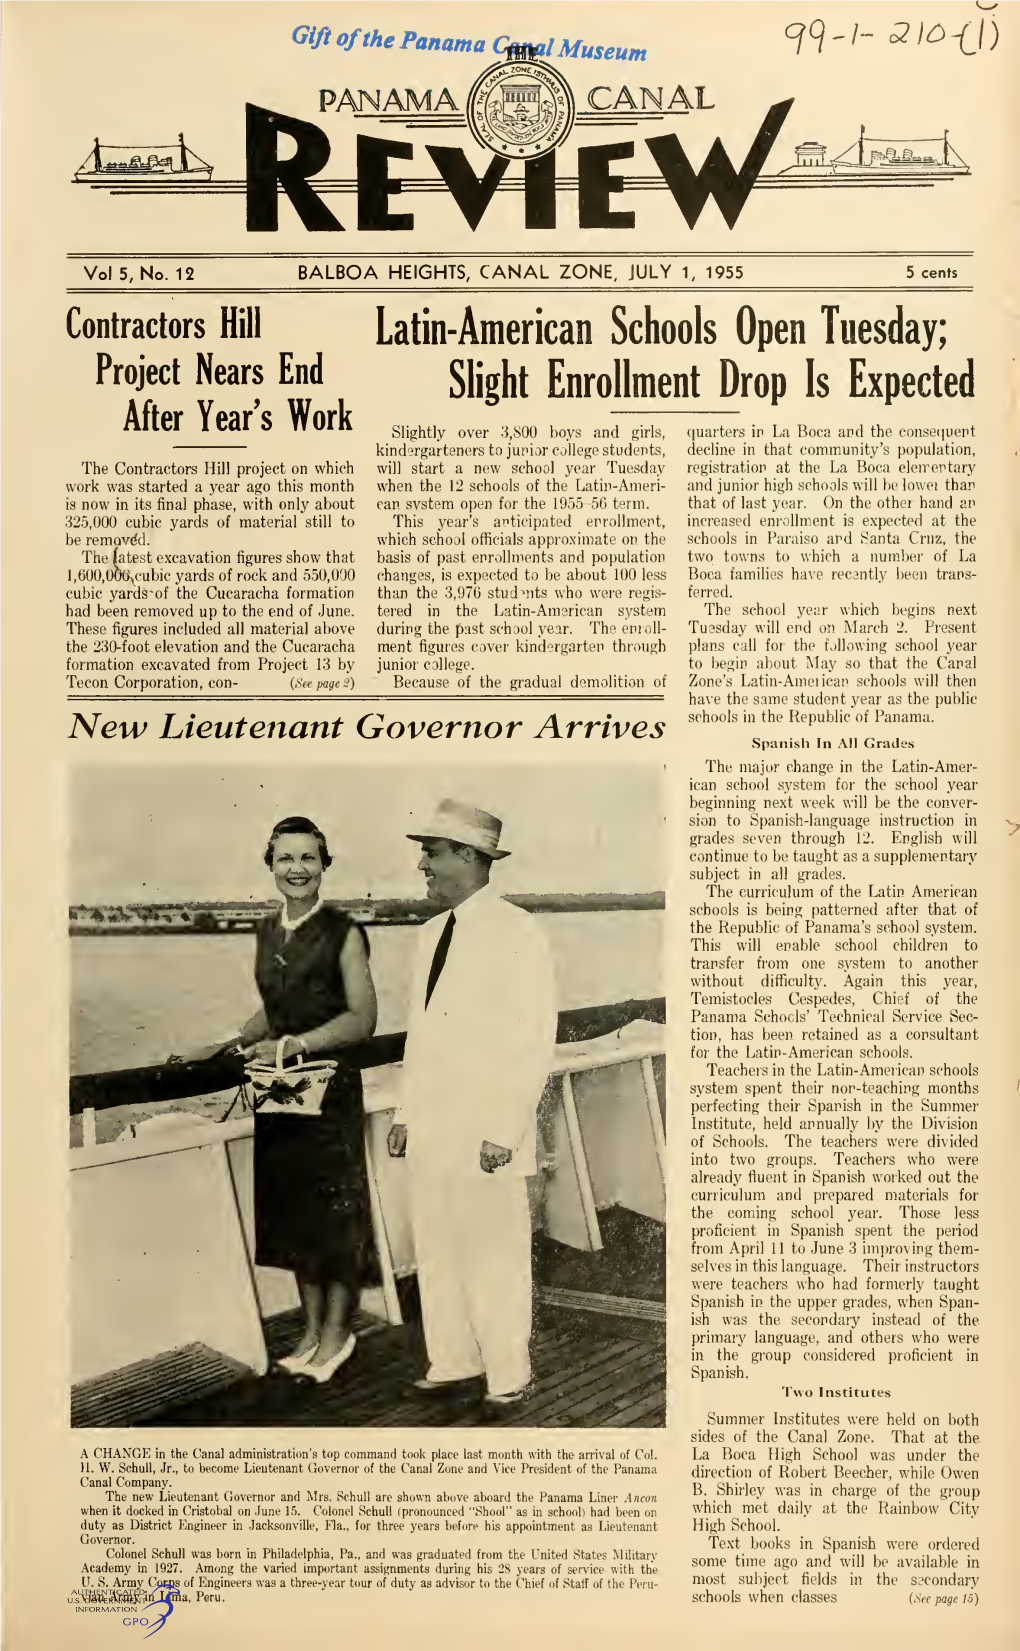 THE PANAMA CANAL REVIEW July 1, 1955